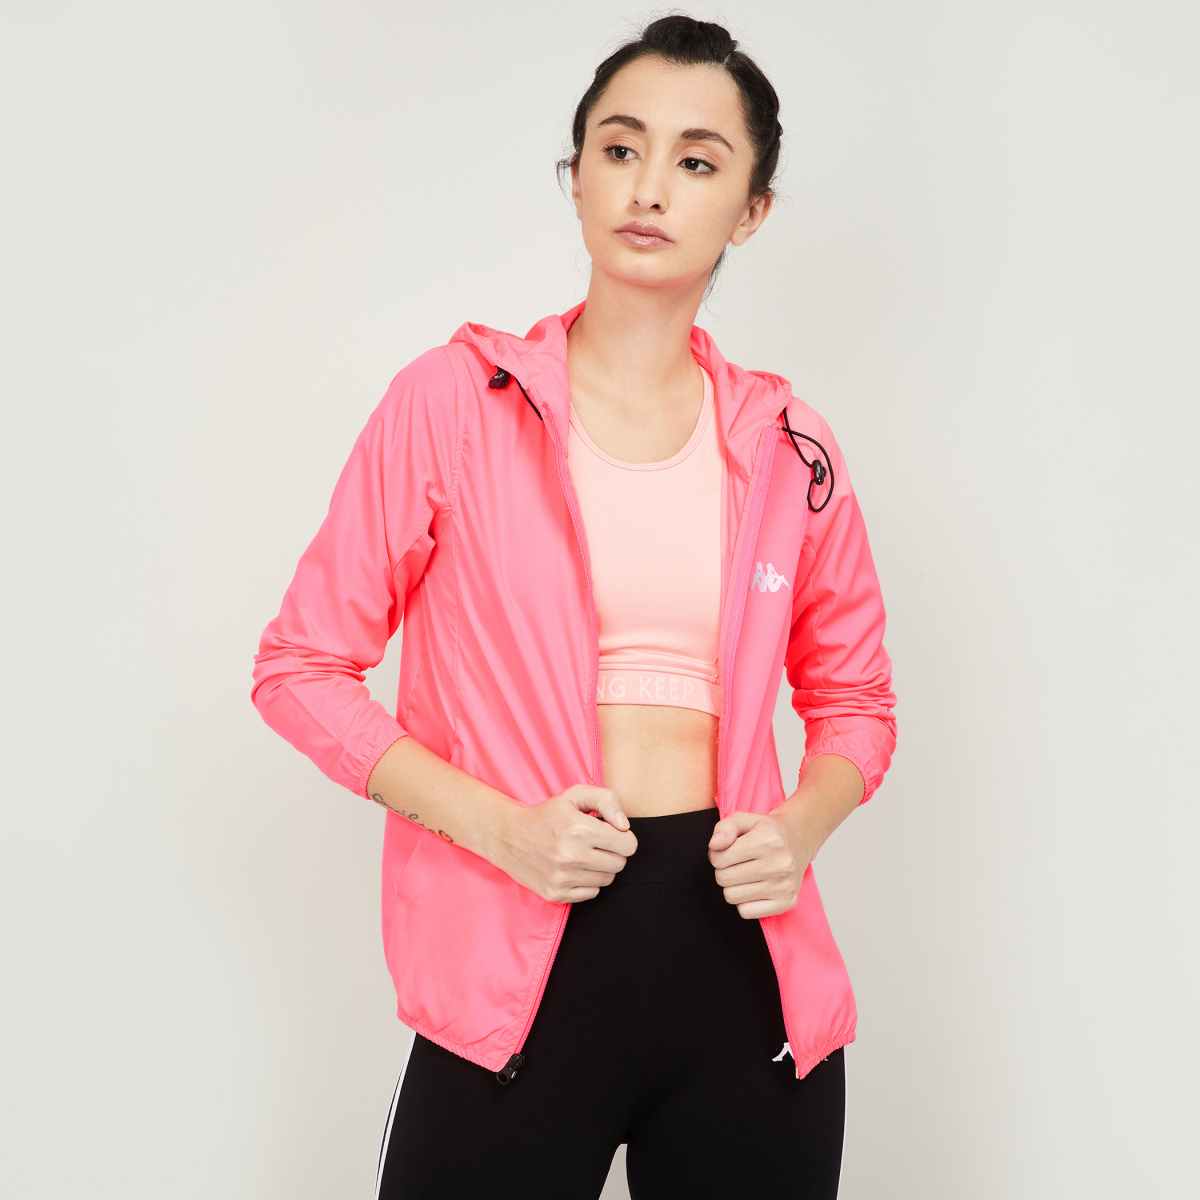 Nobis Women's Harlow Bomber Jacket with Removable Hood - Frank's Sports Shop-hangkhonggiare.com.vn